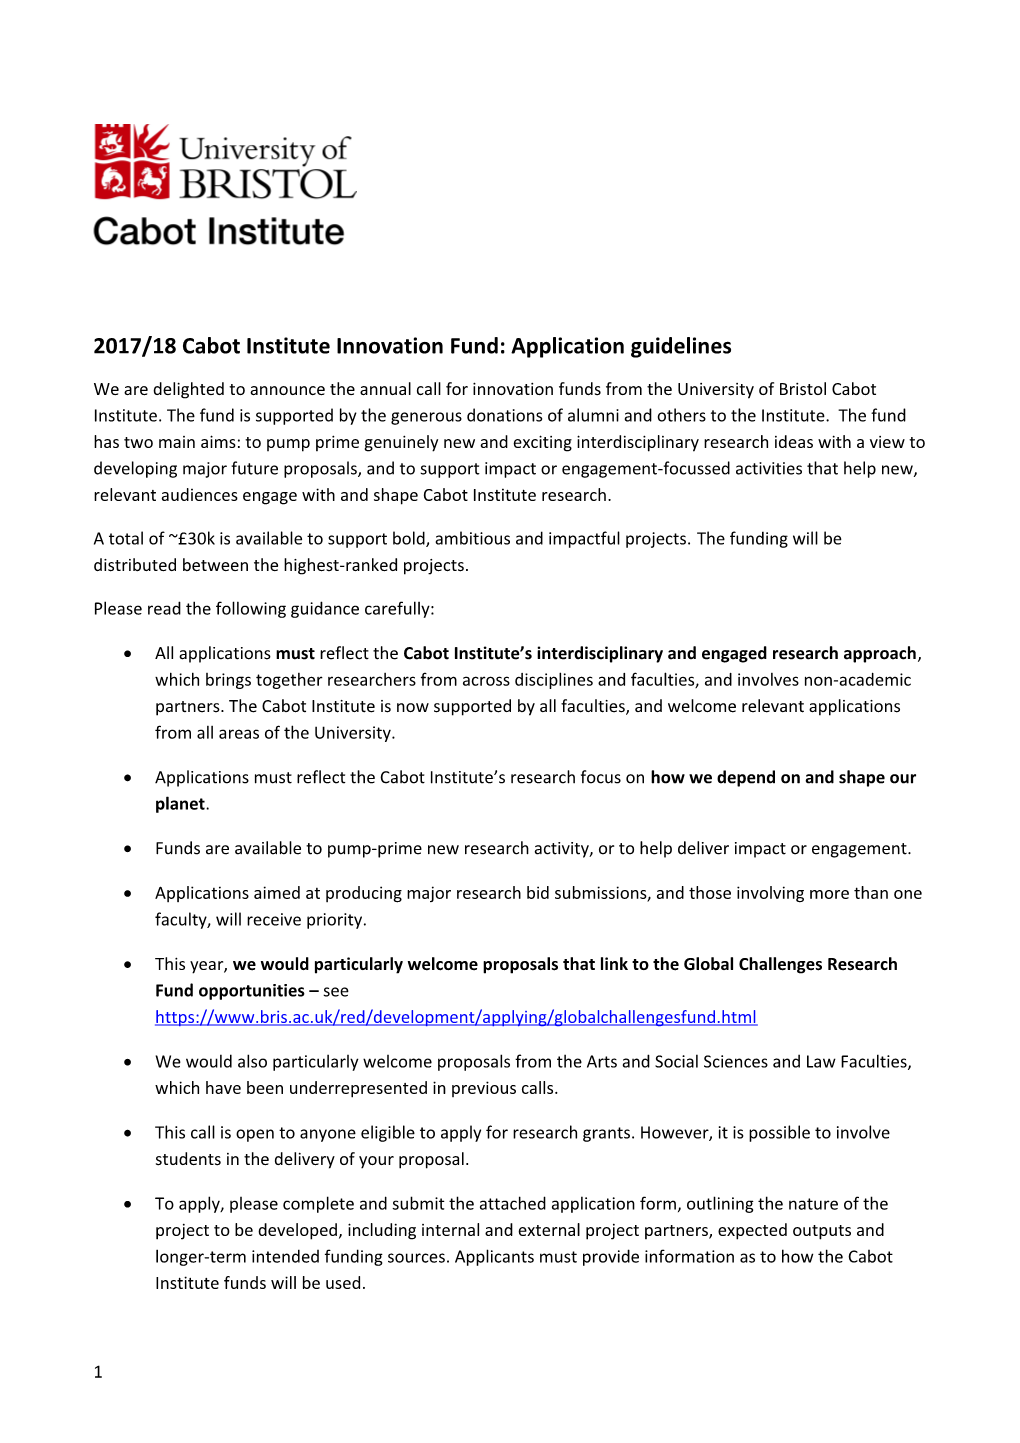 2017/18Cabot Institute Innovation Fund: Application Guidelines